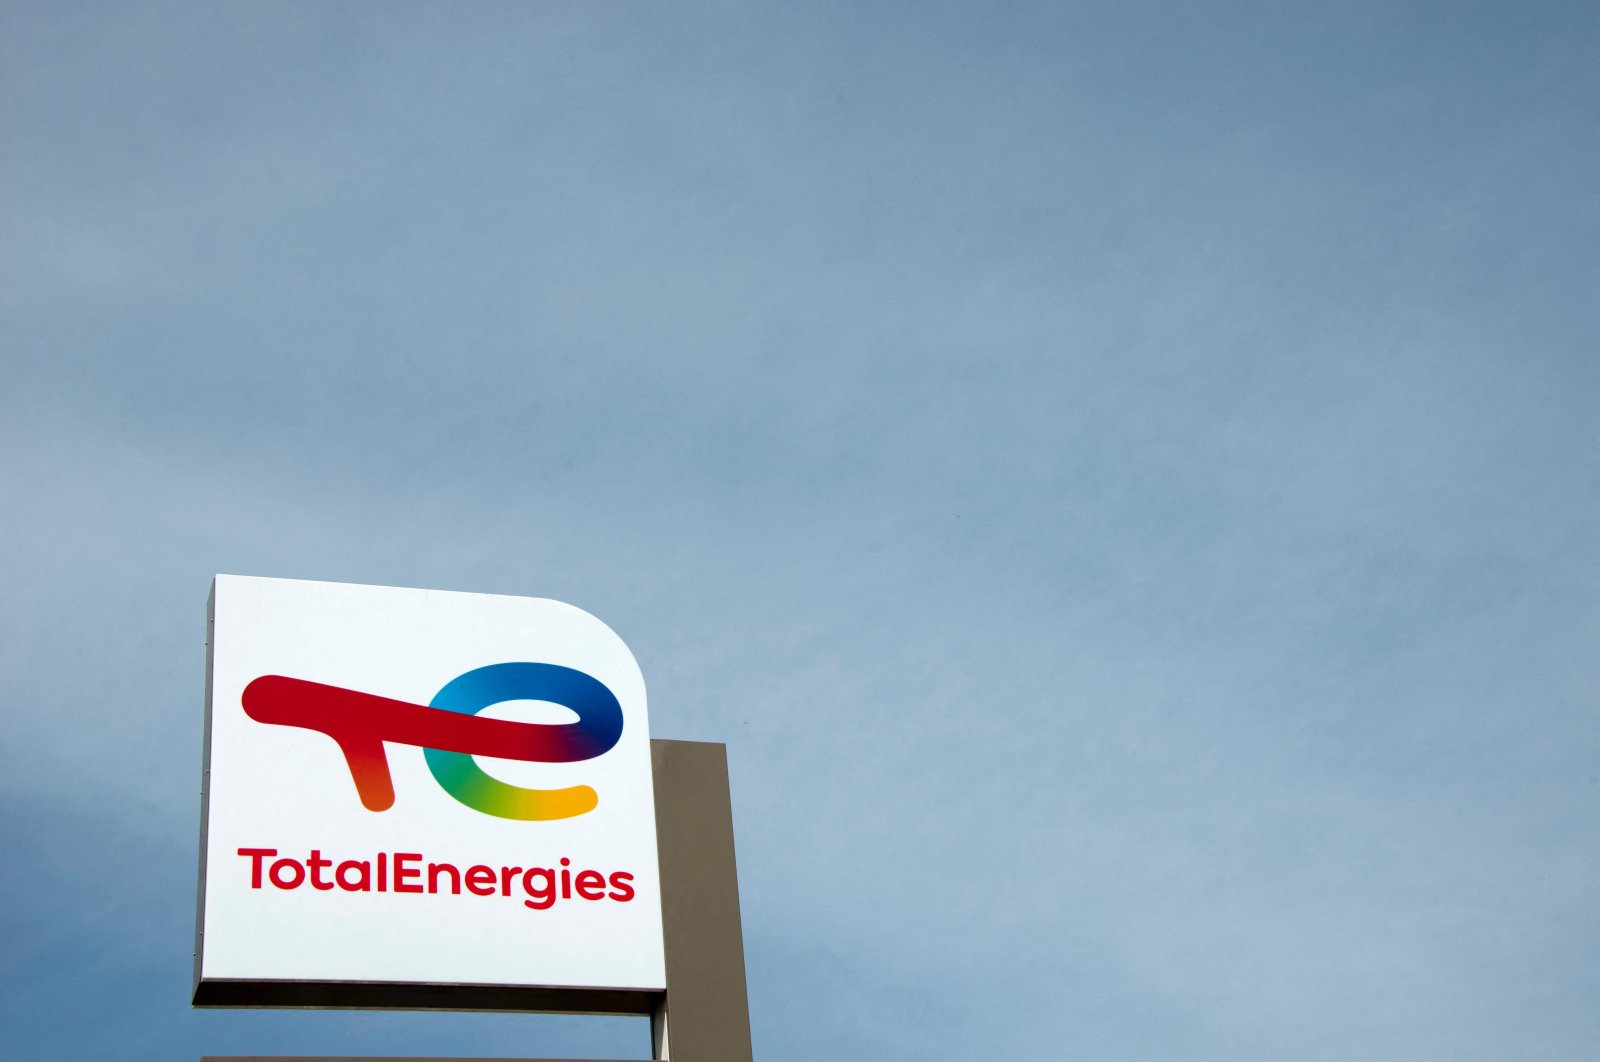 The logo of French oil and gas company TotalEnergies is seen on an oil and gas station in Berlin, Germany, April 29, 2022. (AFP Photo)